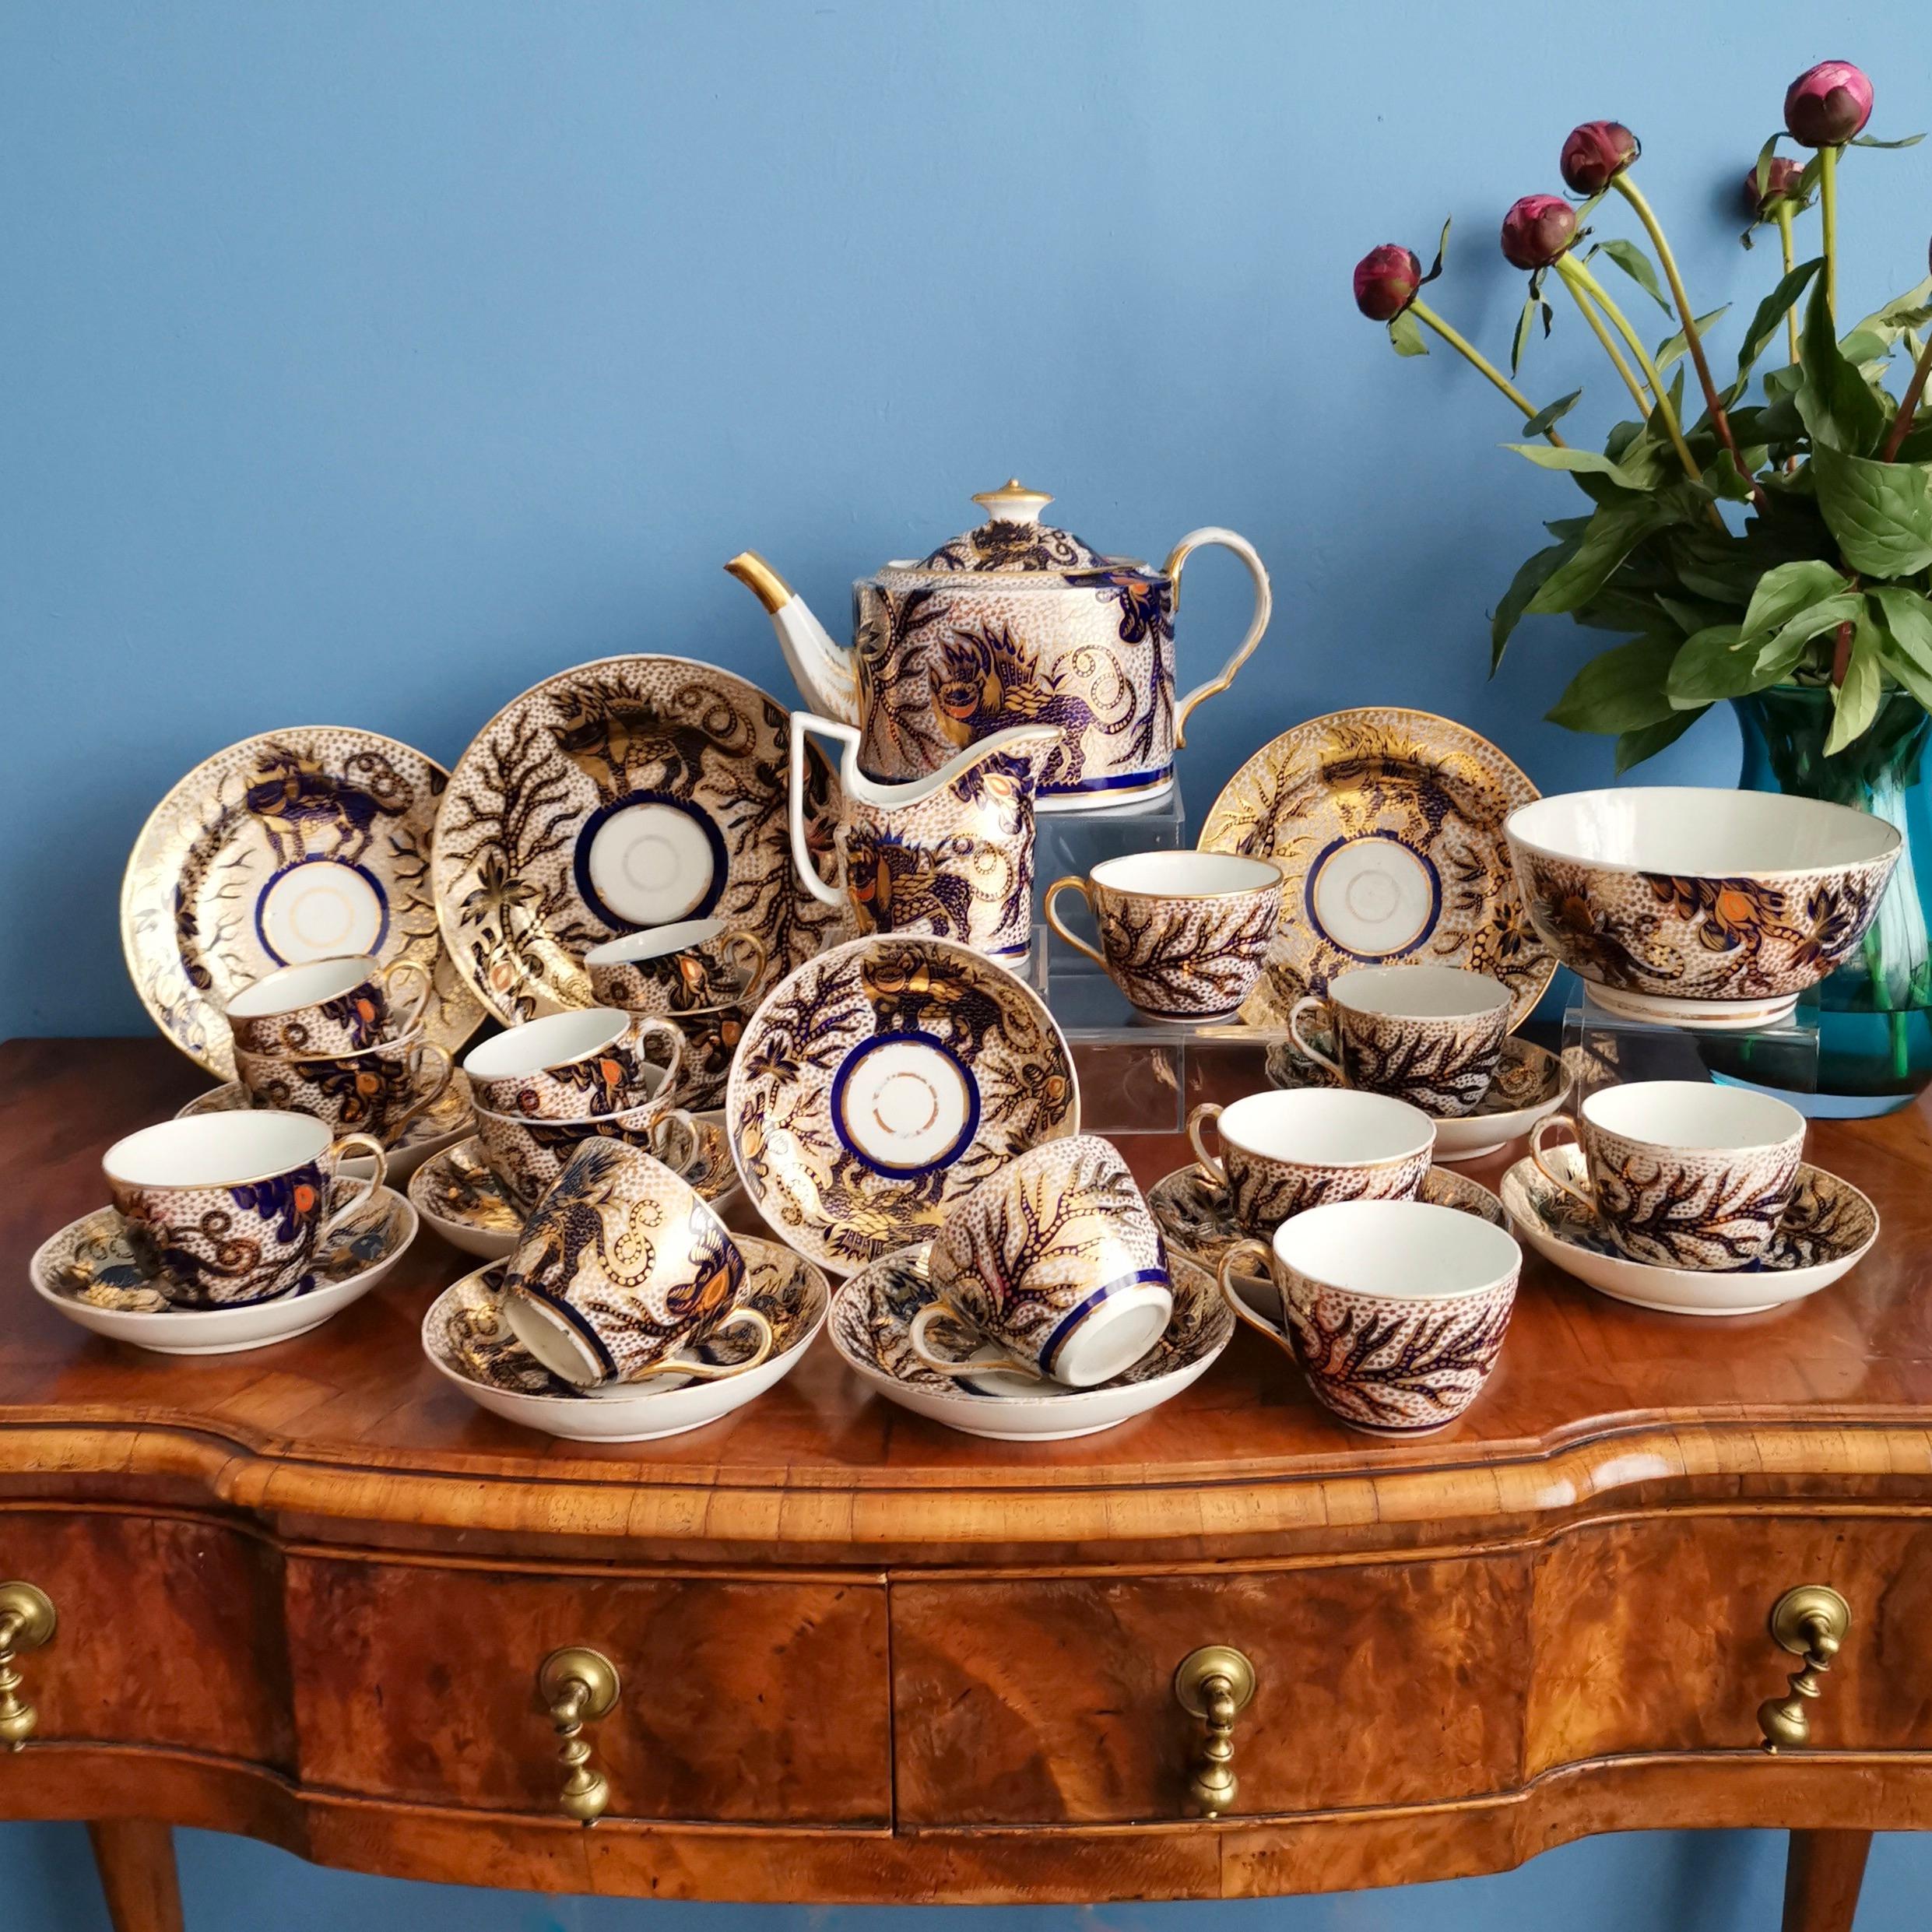 This is a gorgeous and extremely rare tea service made by Thomas Rose (Coalport) in circa 1800. The service consists of a teapot and cover, a milk jug, a large cake plate and two smaller cake plates, three coffee cans, eleven teacups, ten saucers